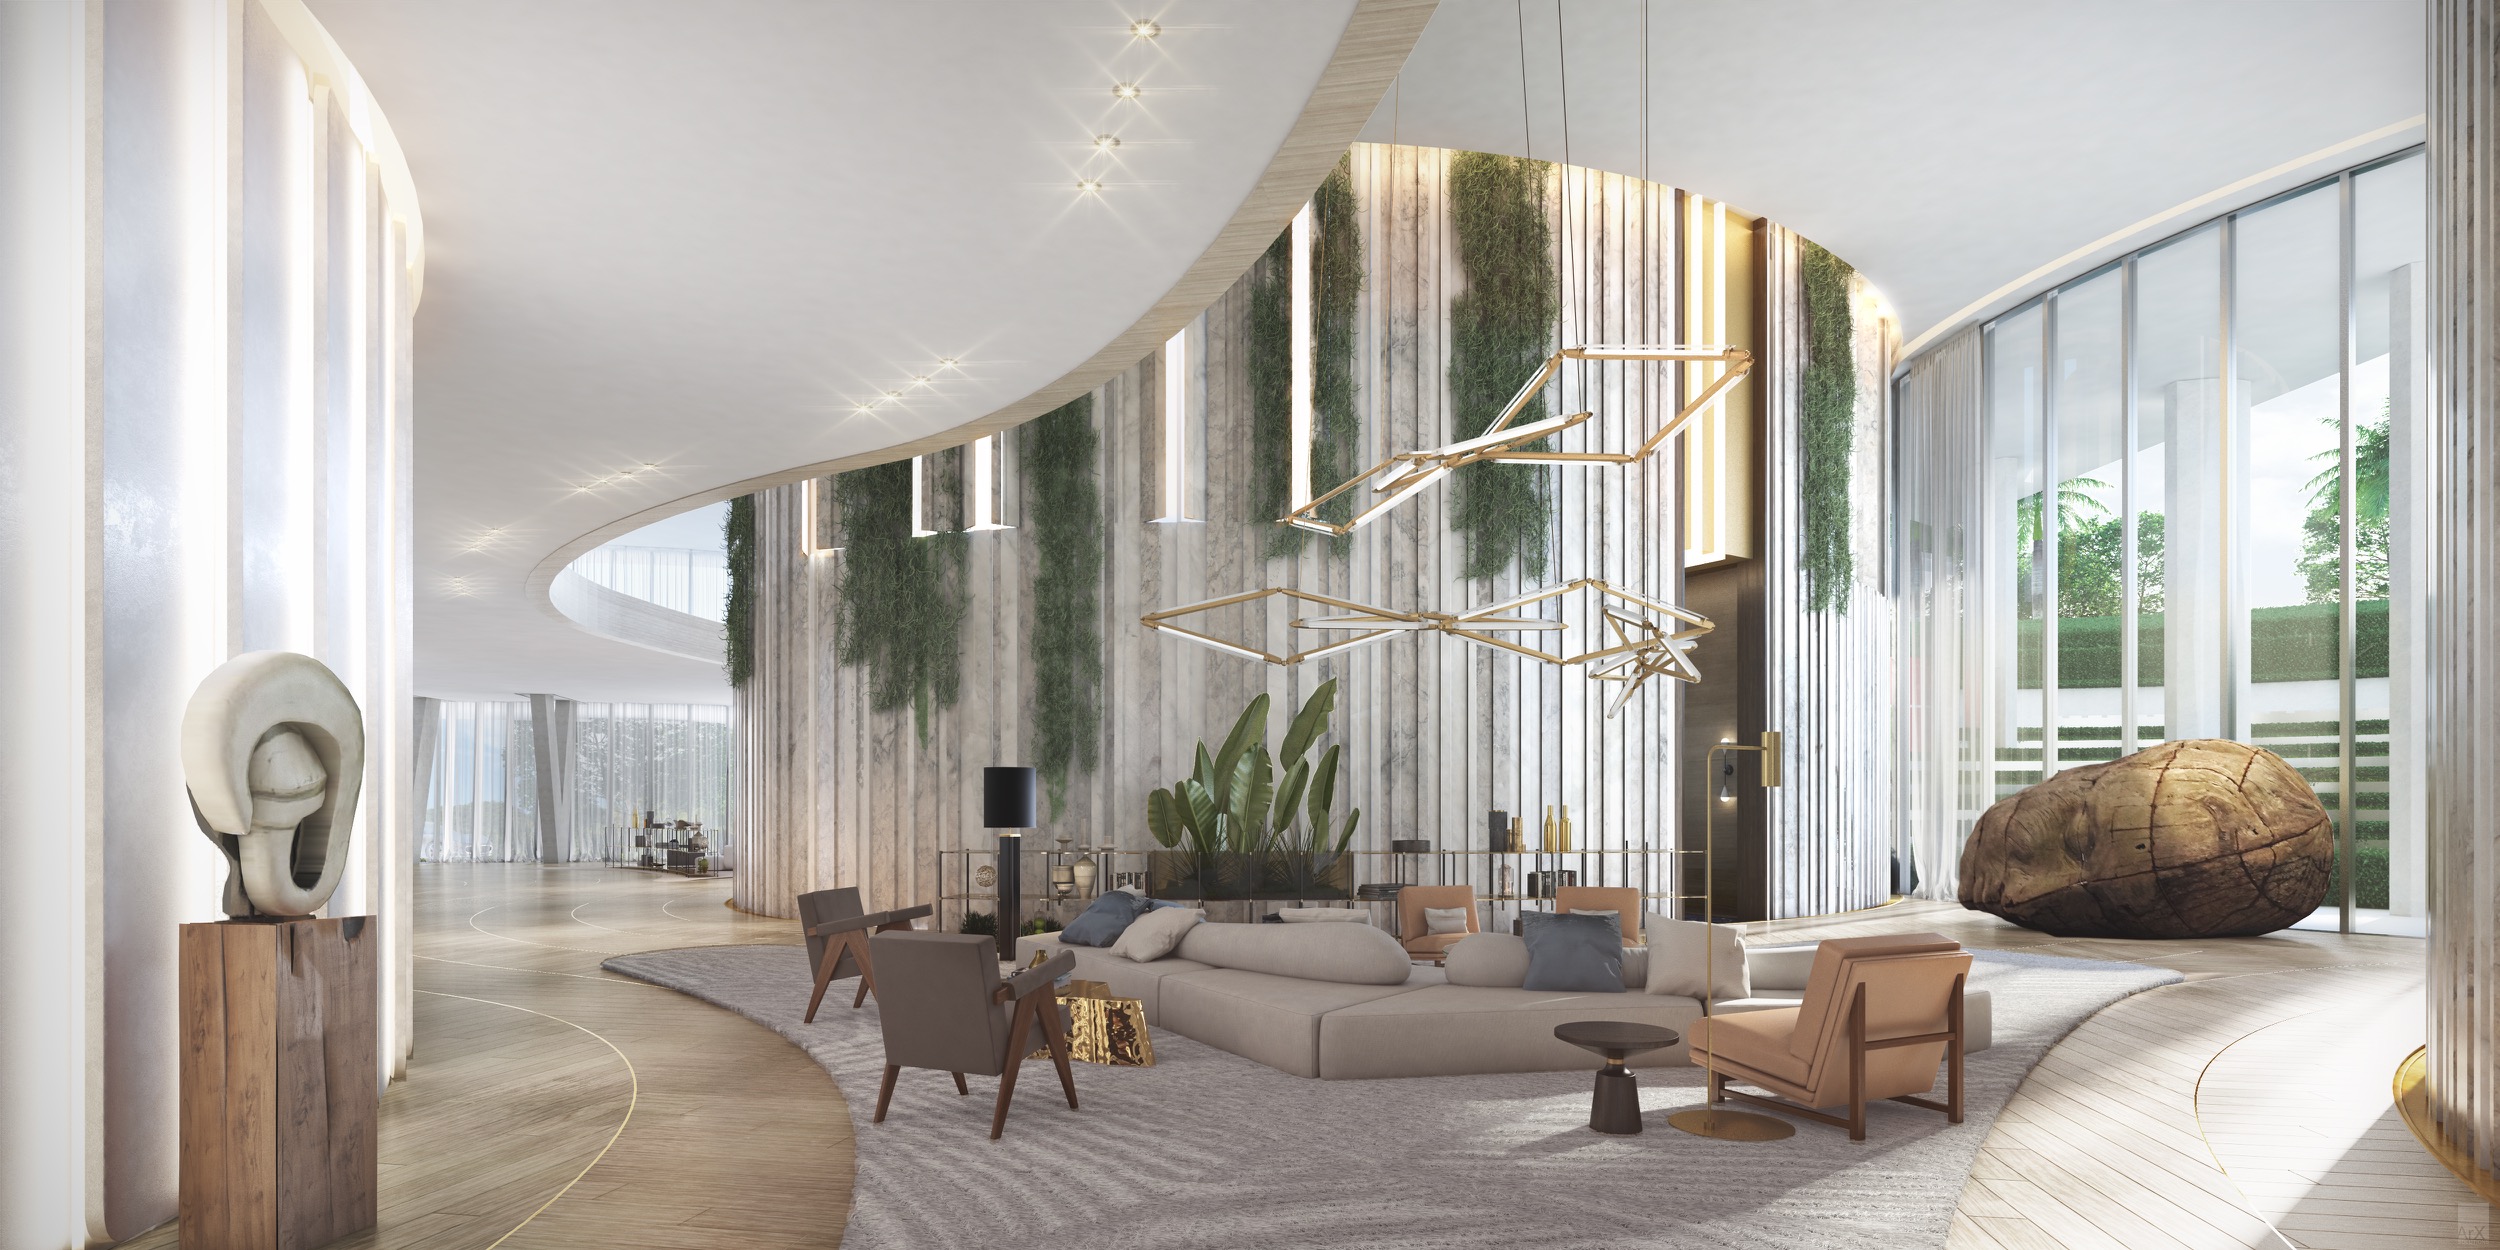 Starchitect Rem Koolhaas’ One Park Grove Debuts New Interior Renders